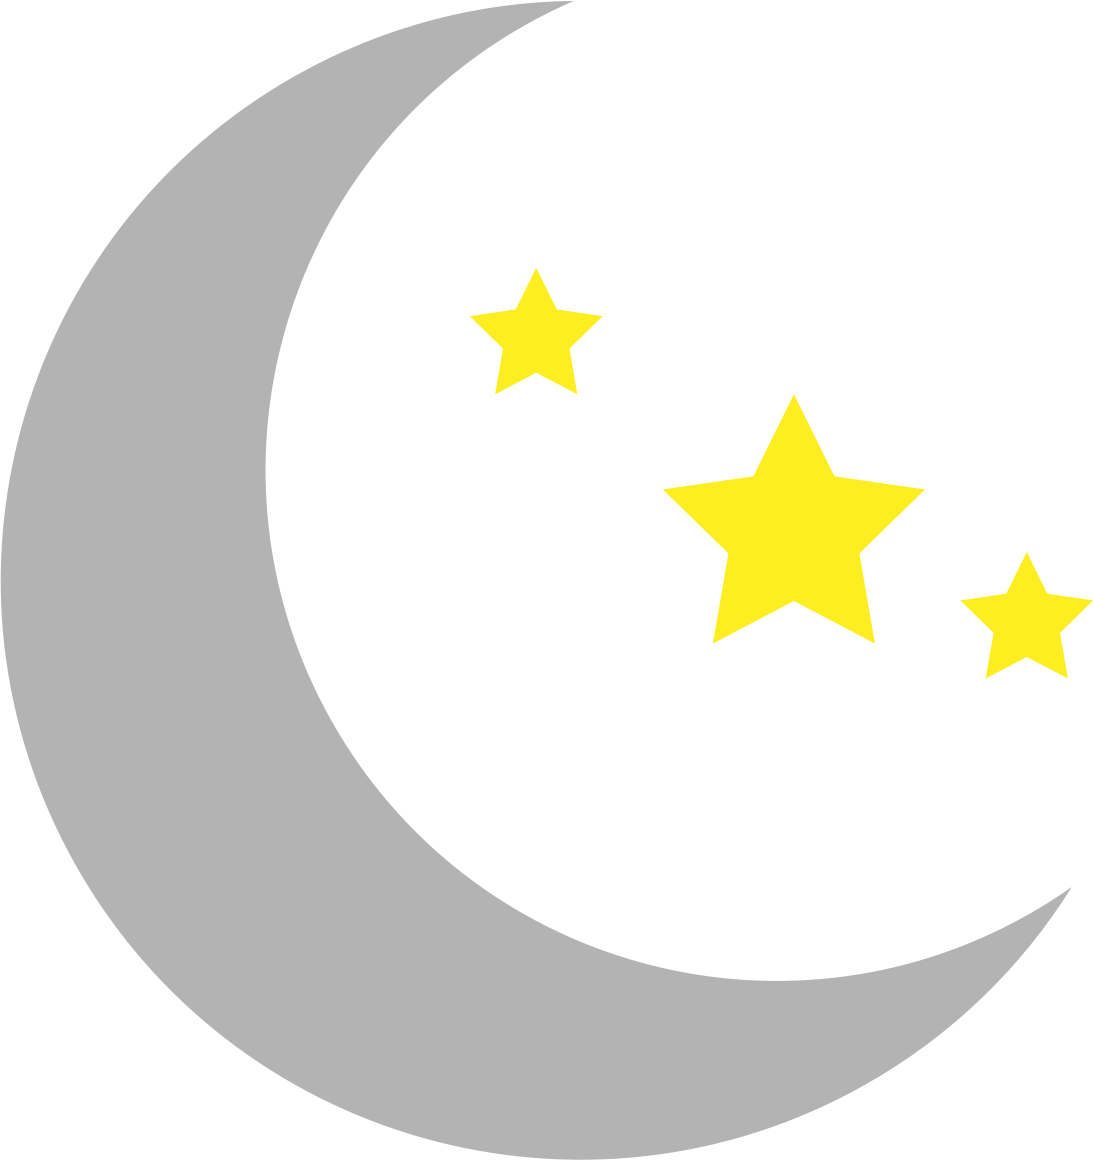 Moon With Stars Clipart; Moon And Stars Clipart - clipartall ...